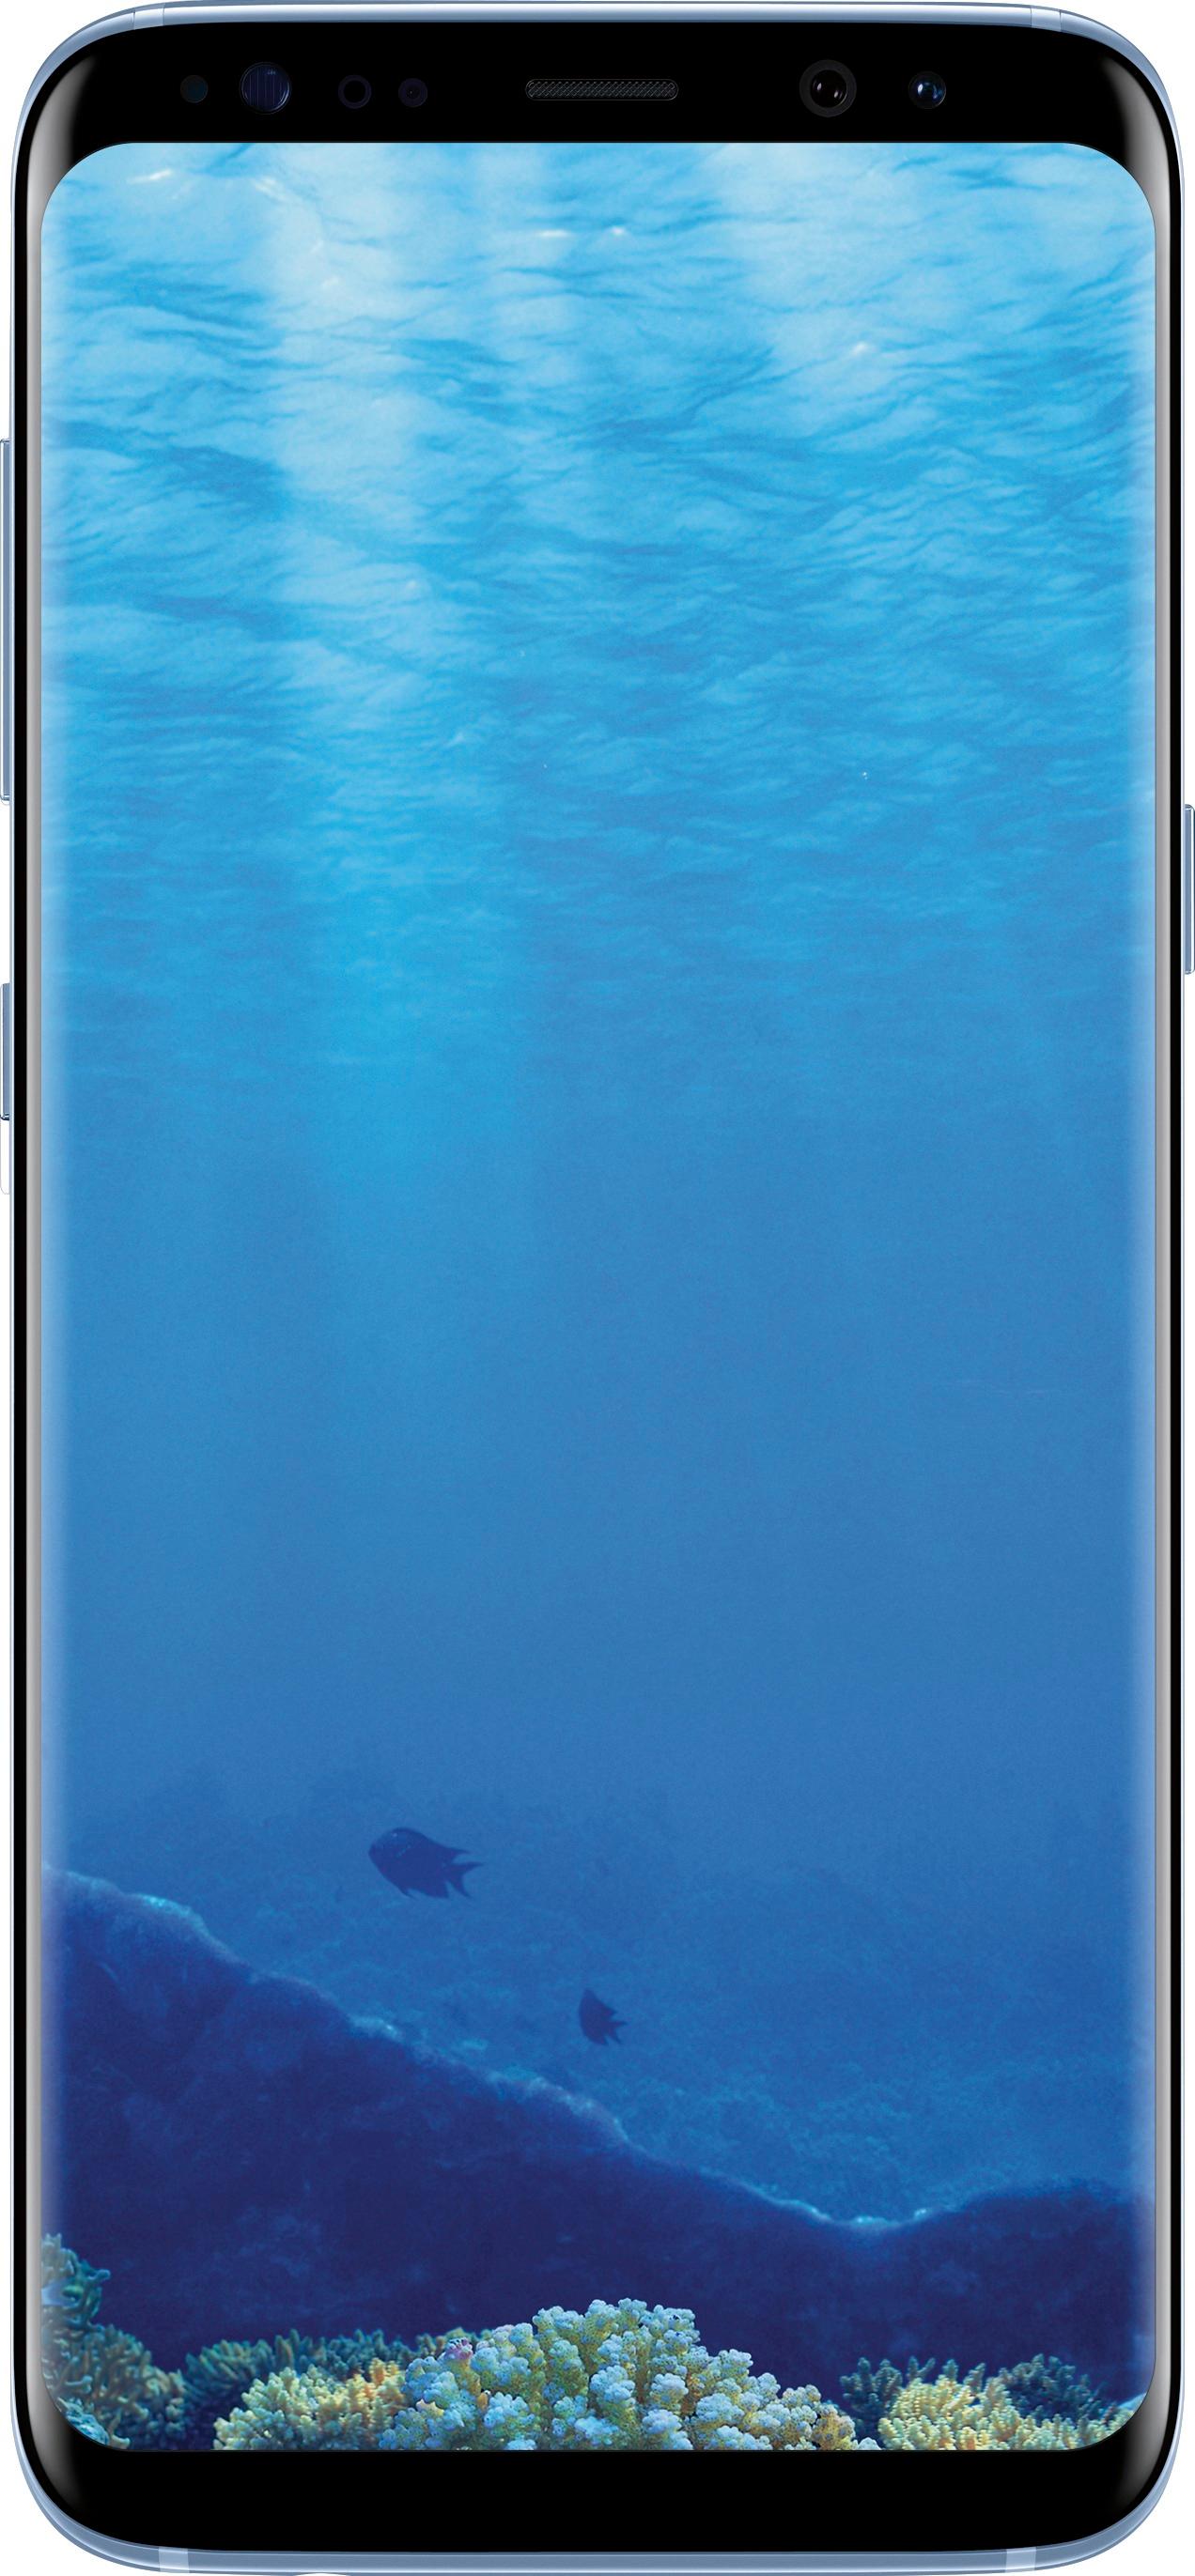 Aardbei compleet George Hanbury Best Buy: Samsung Galaxy S8 4G LTE with 64GB Memory Cell Phone (Unlocked)  Coral Blue SM-G950UZBAXAA